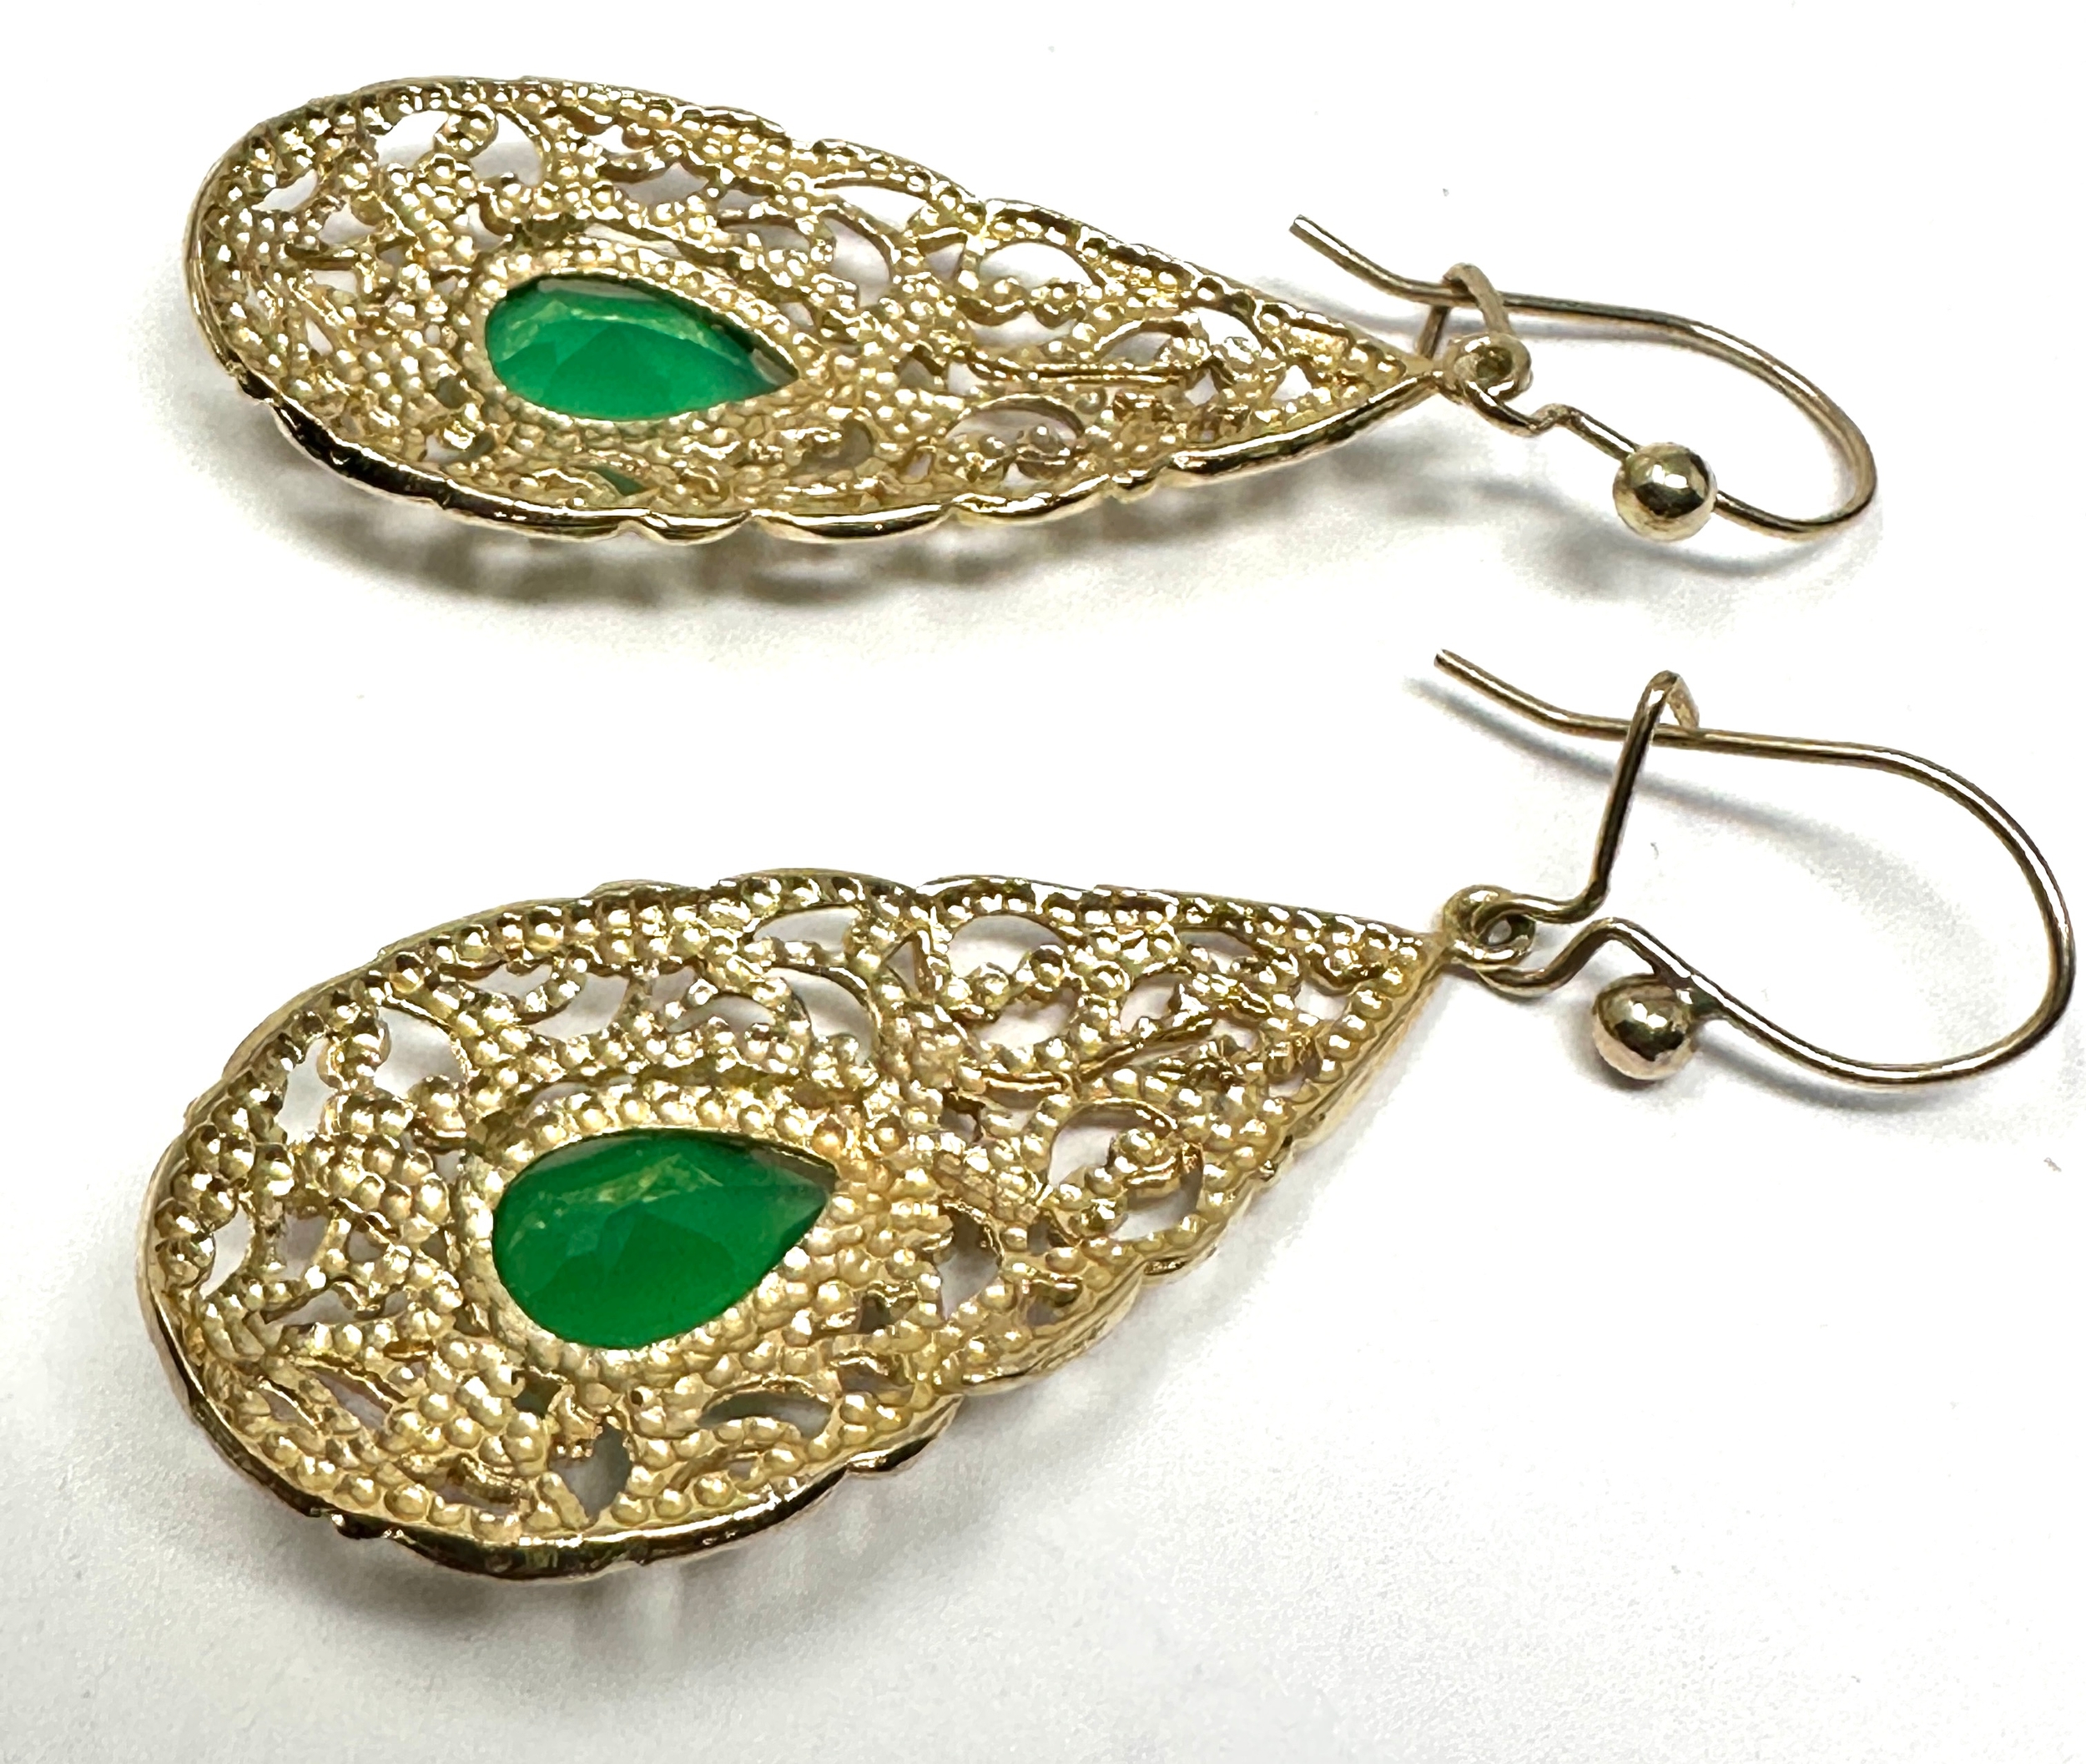 9ct gold chrysoprase earrings weight 5.3 gram measure approx 3.6cm drop not including fixing - Image 3 of 3